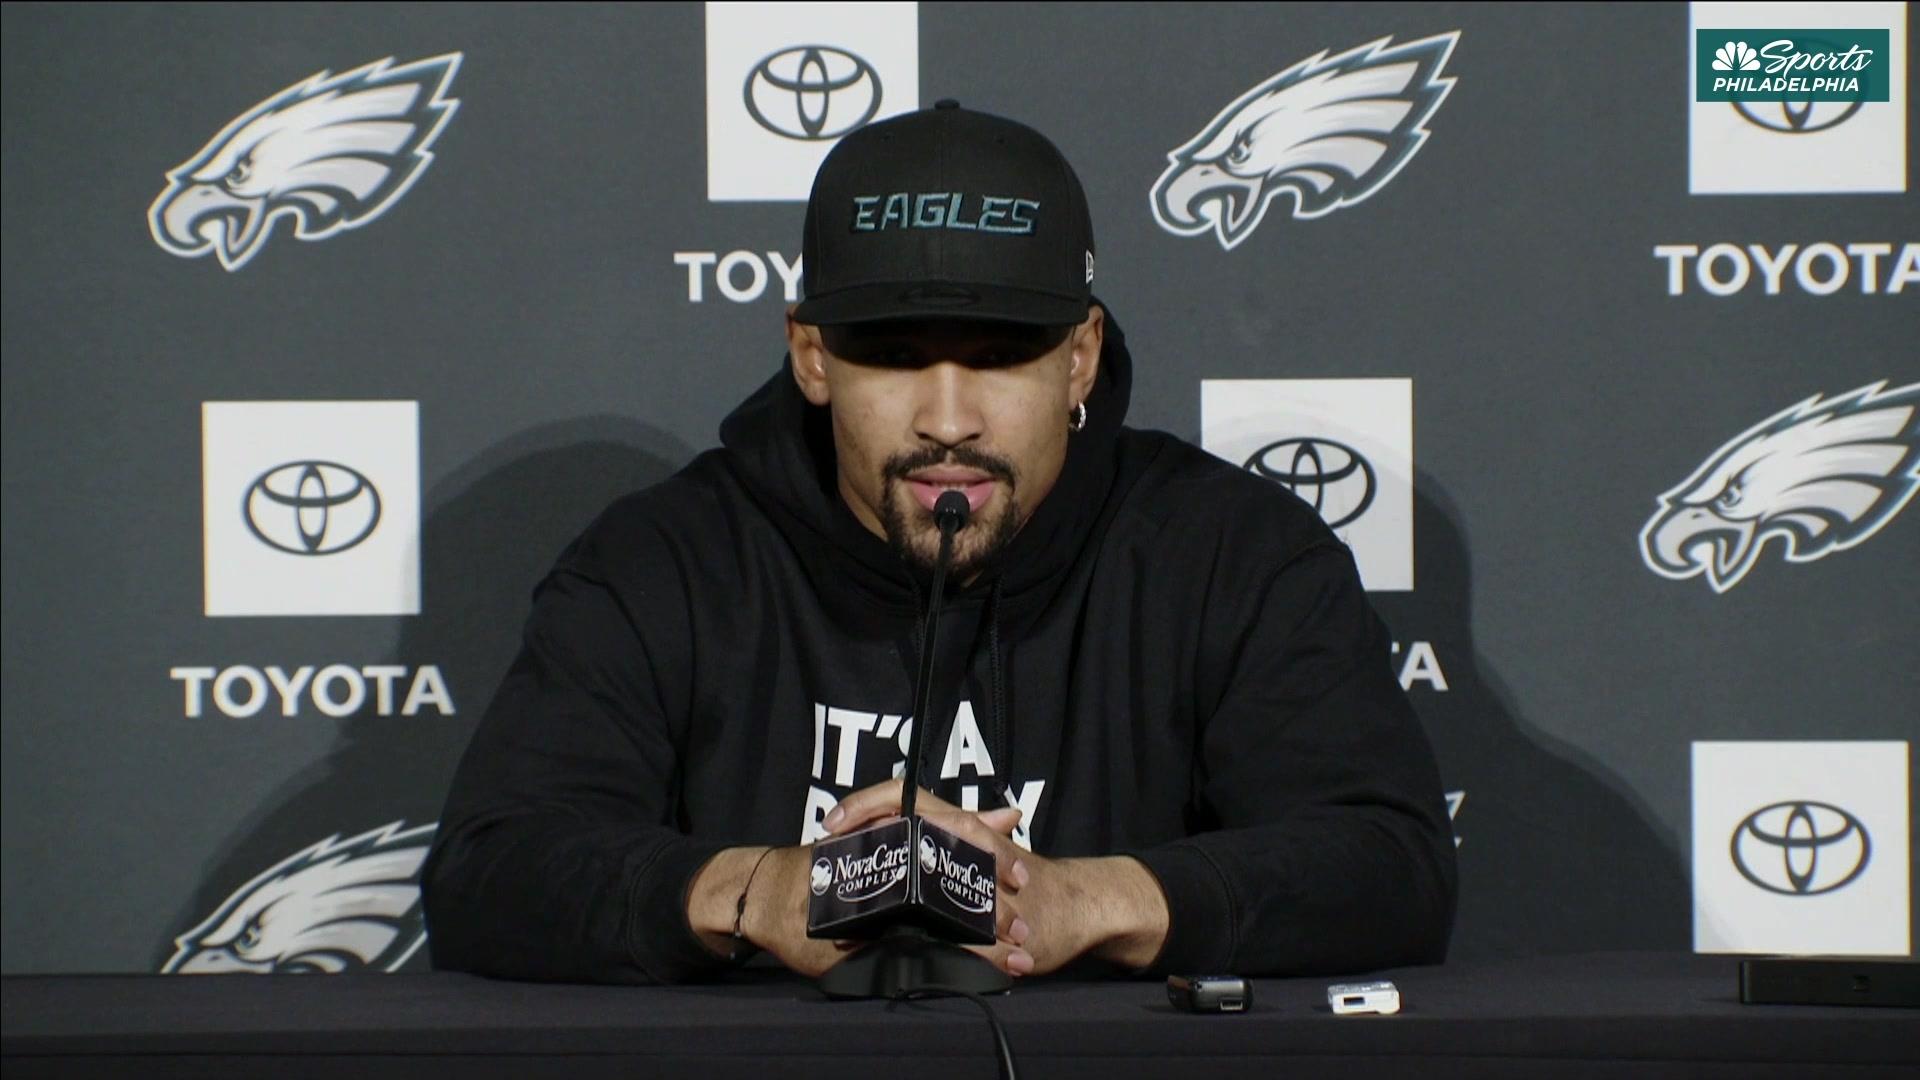 Eagles playoffs: 'It's a Philly Thing' merchandise selling out